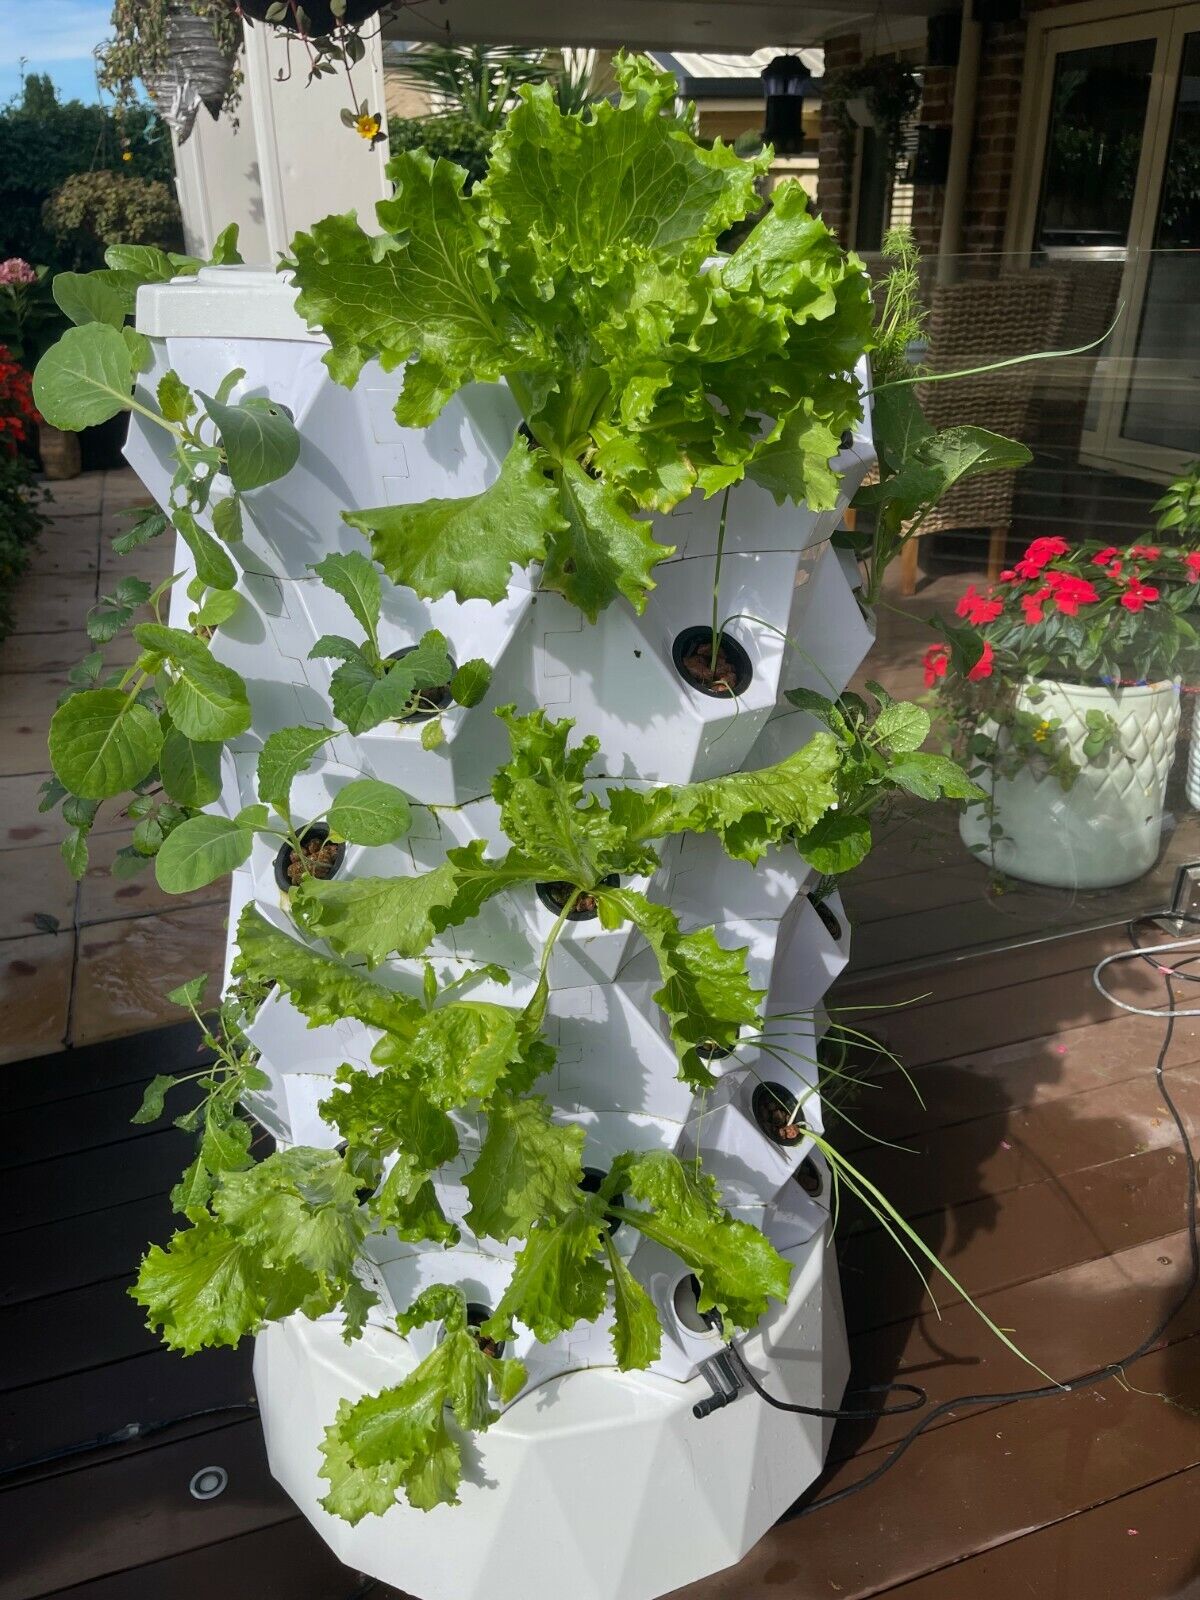 80 Planter Vertical Hydroponics Growing Tower Kit